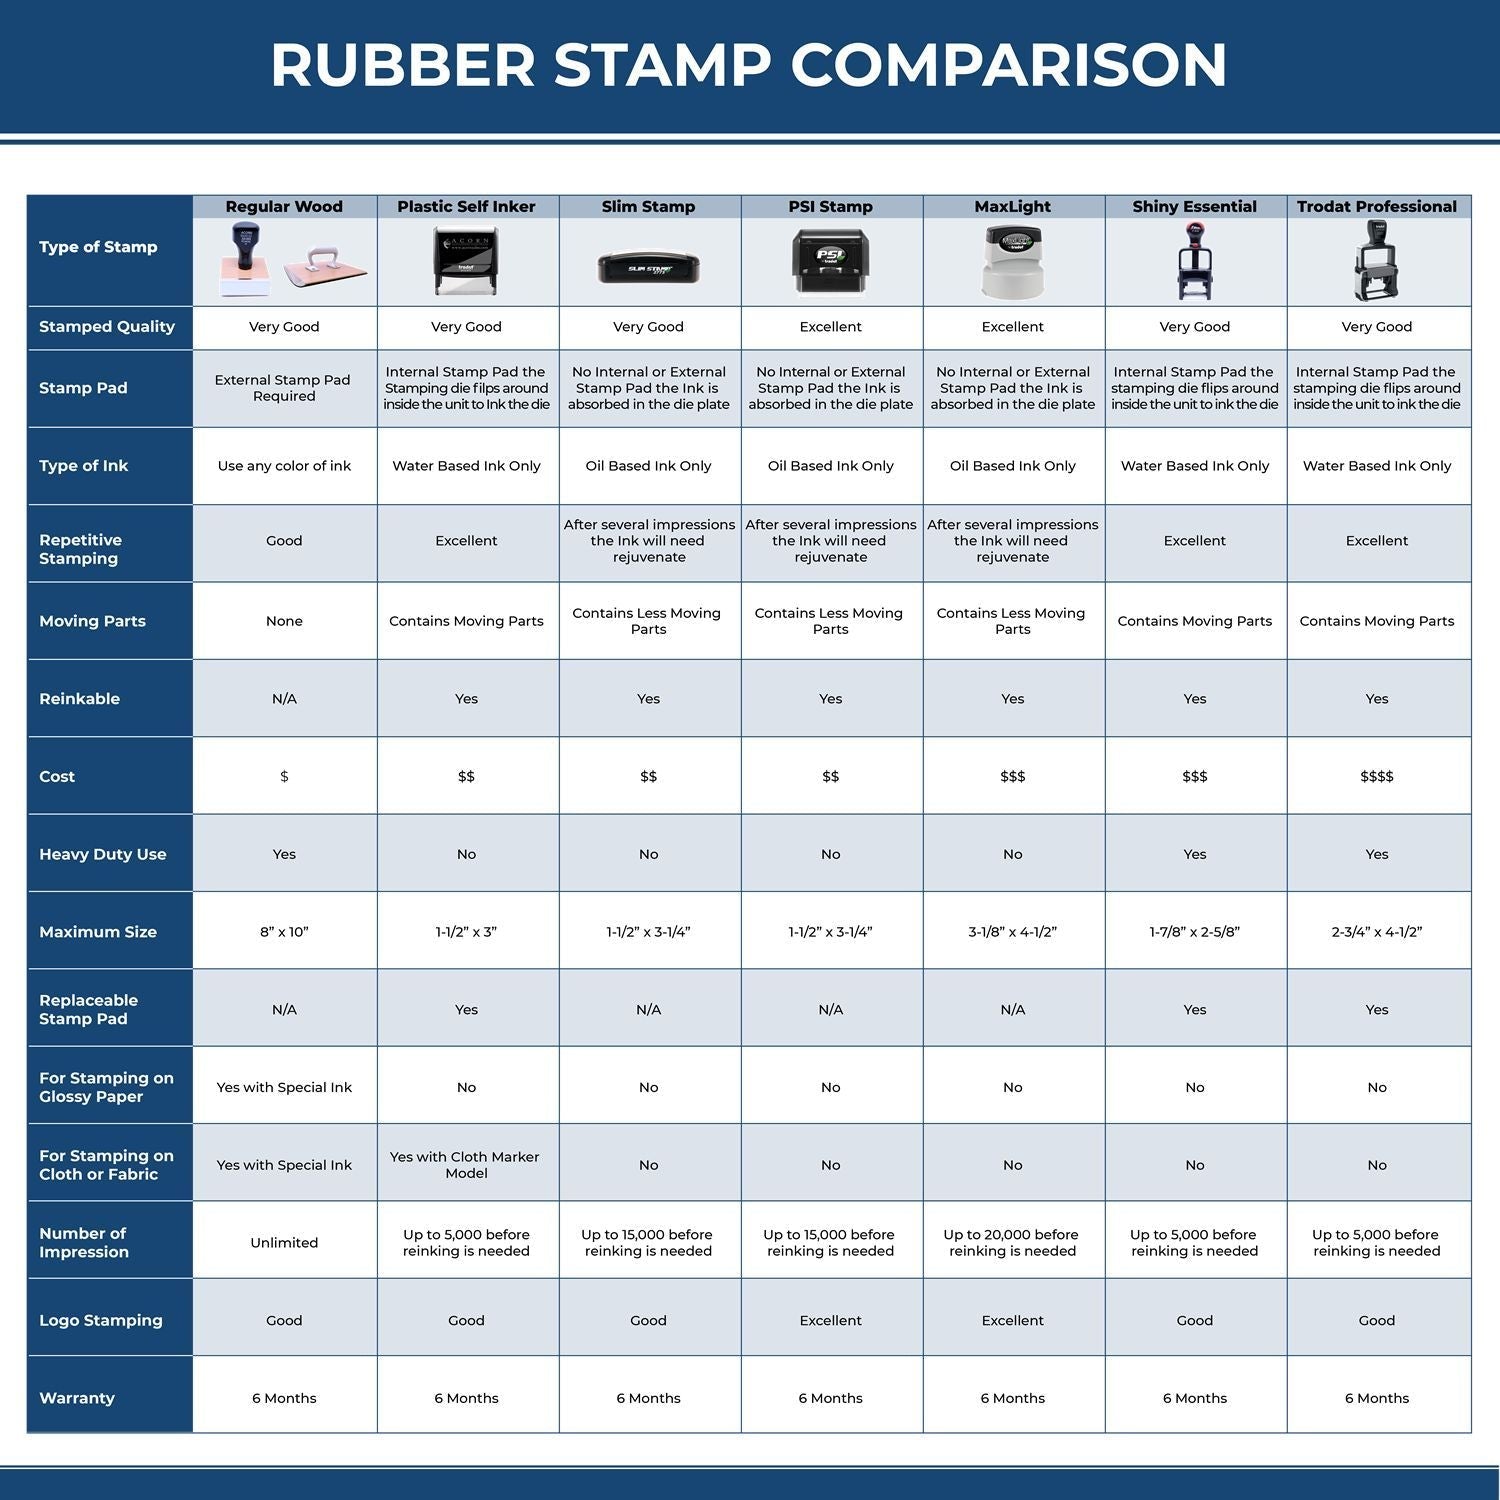 Confirmation of Phone Order Rubber Stamp